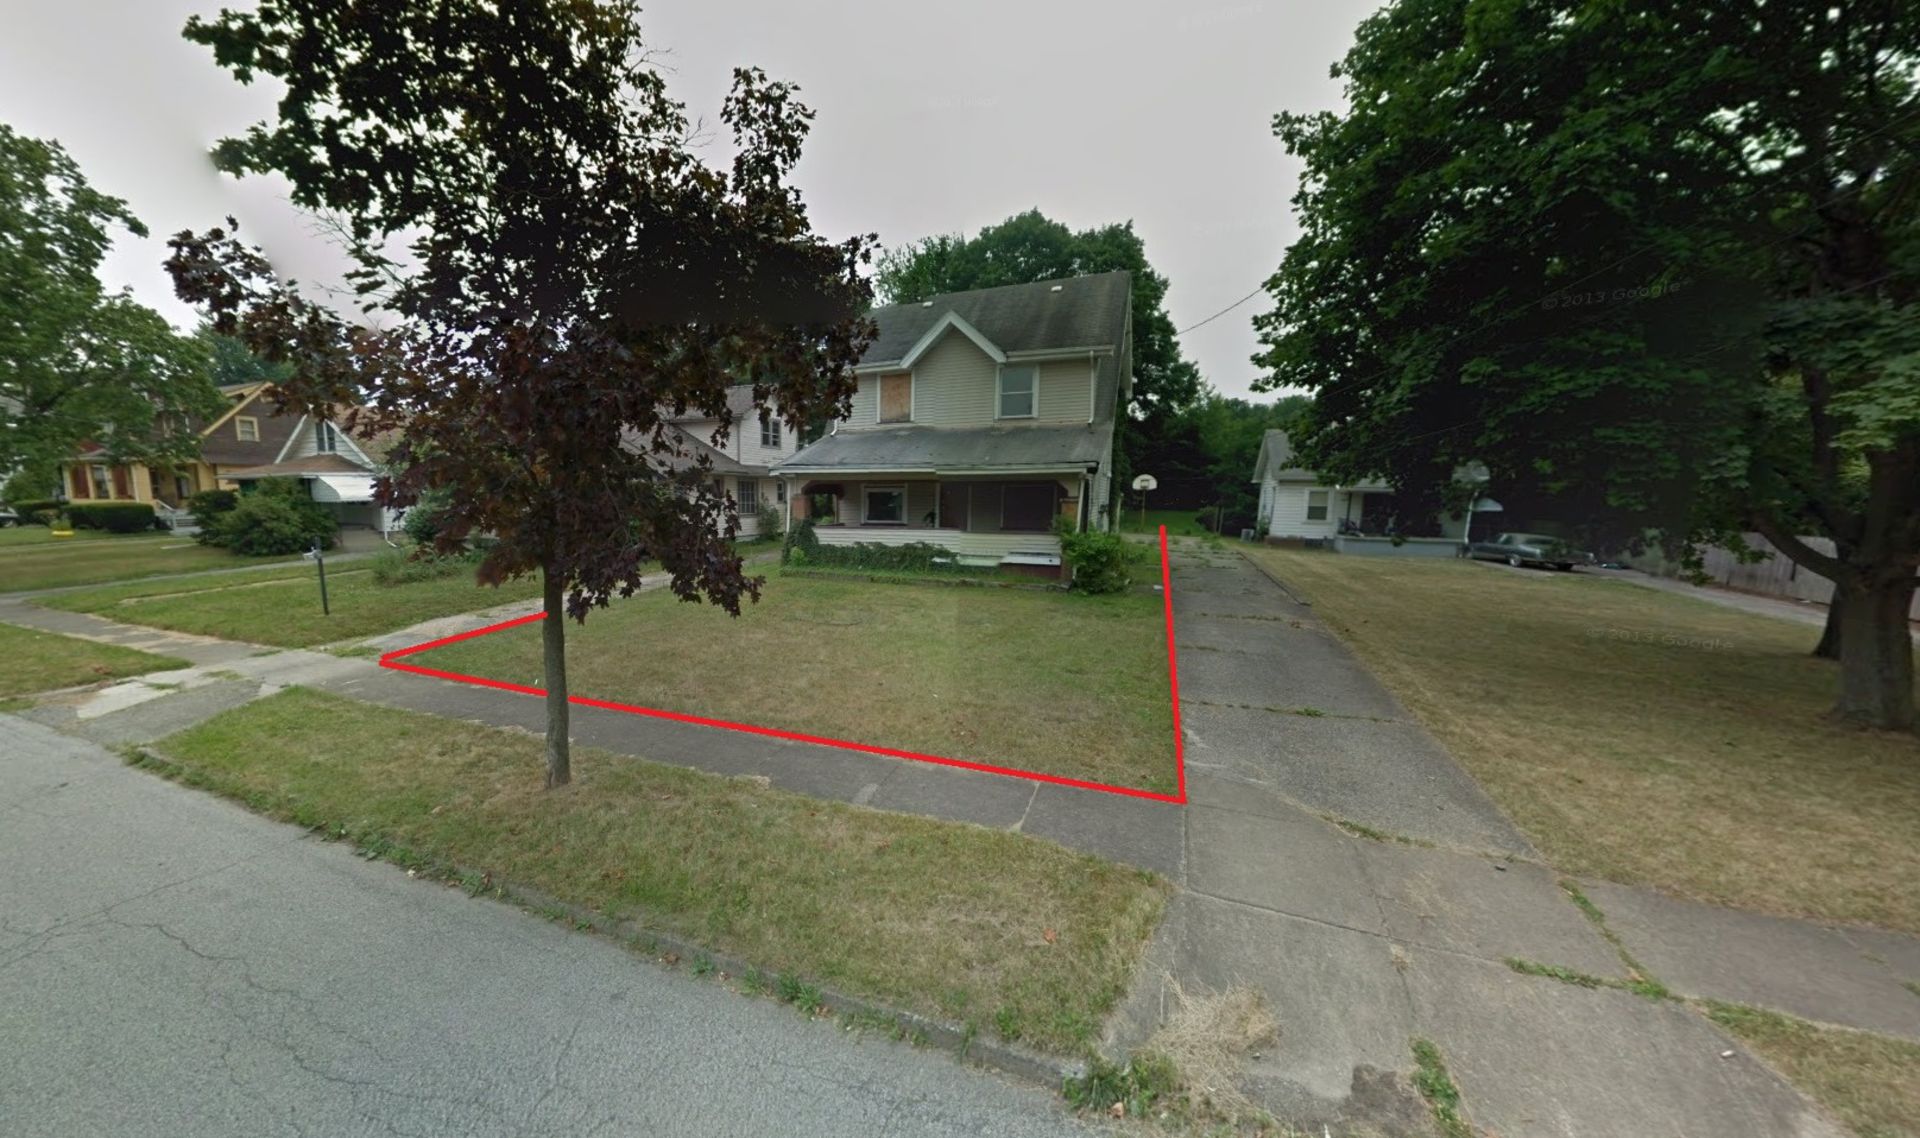 PLOT OF LAND AT 1921 S HEIGHTS AVENUE, YOUNGSTOWN, OHIO - Image 5 of 8